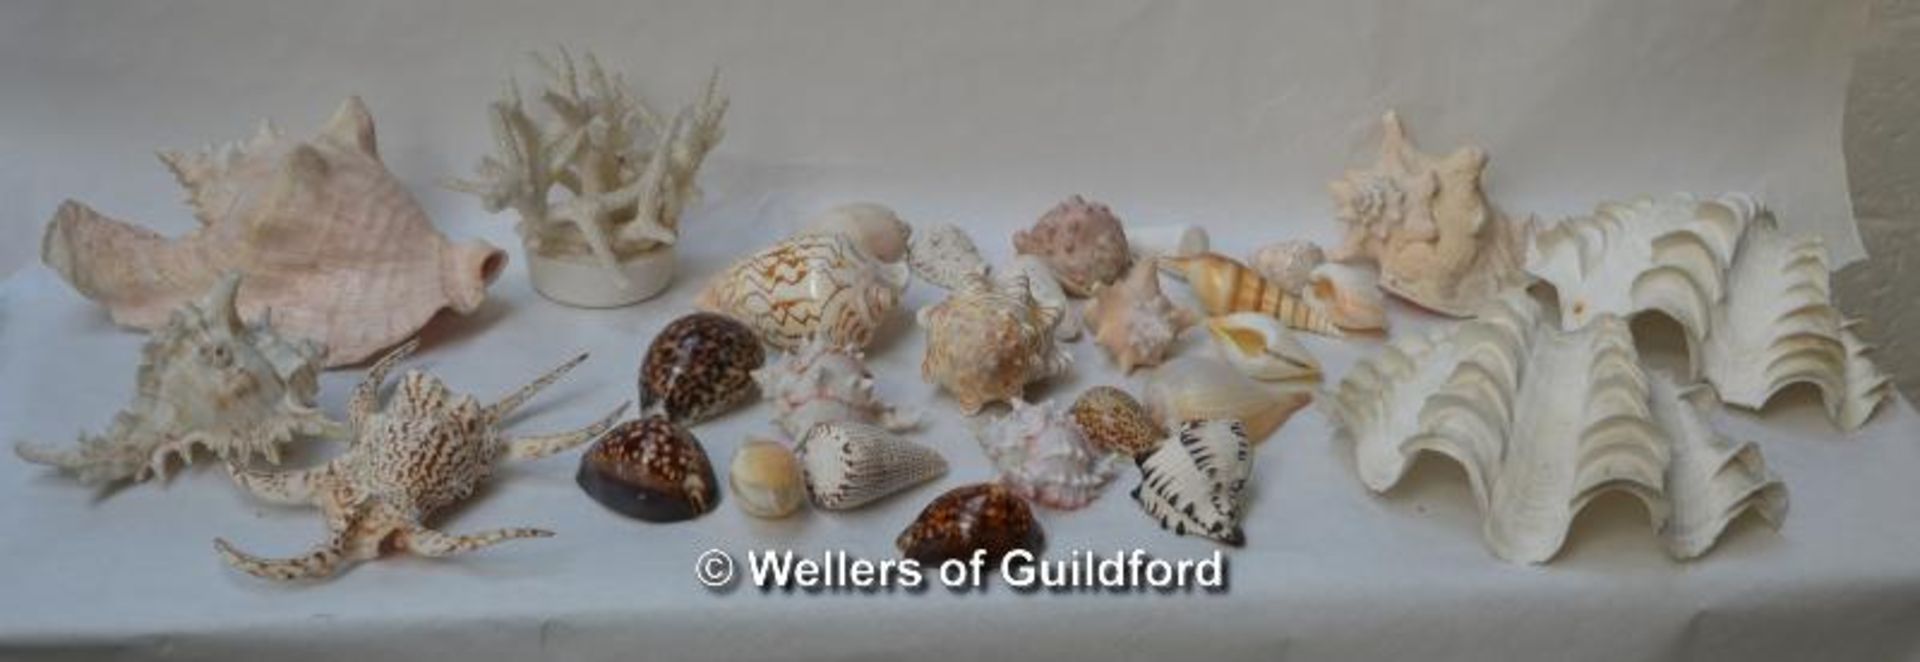 A small quantity of seashells and coral, including a clam shell.